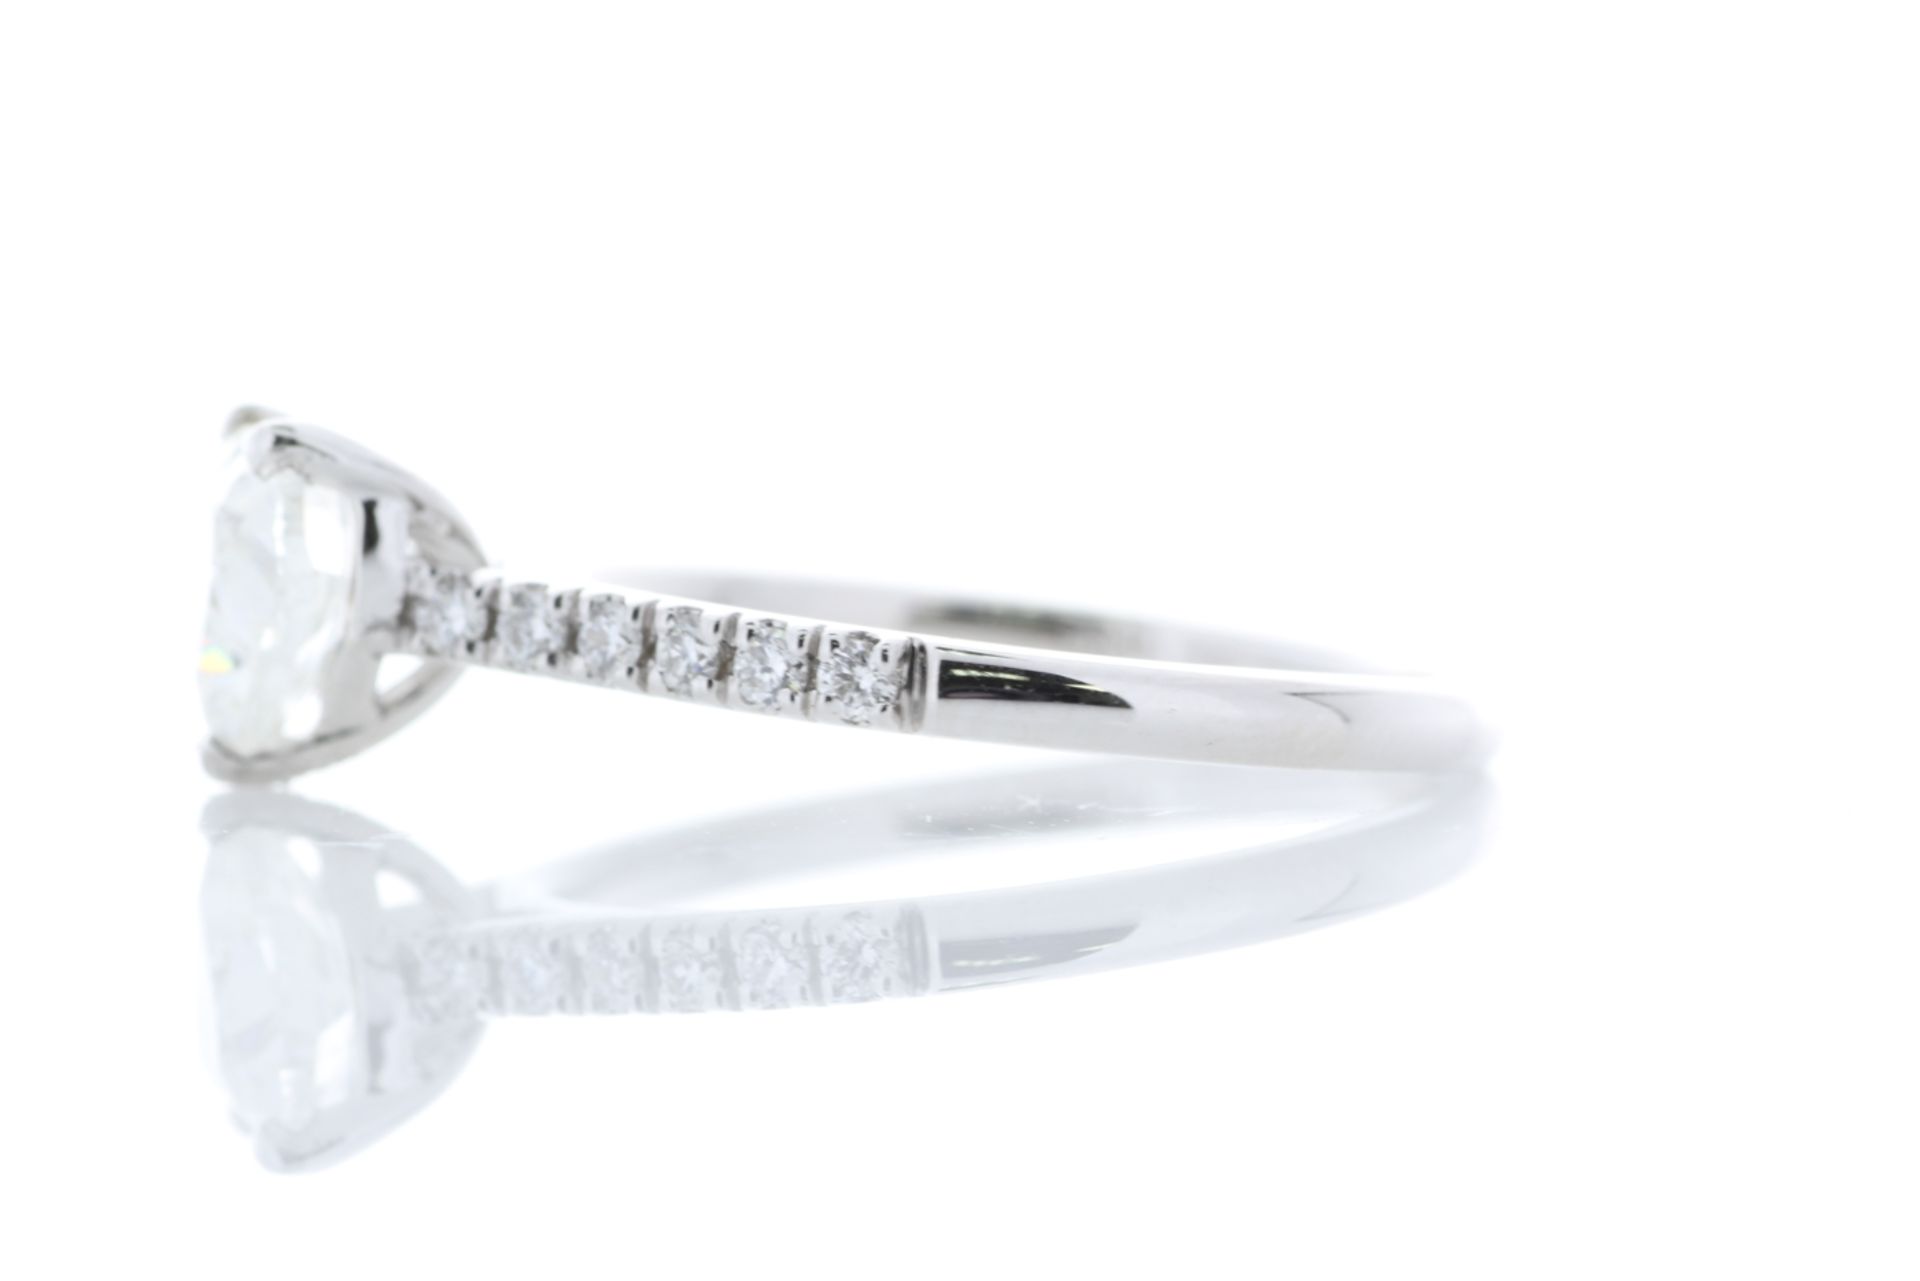 18ct White Gold Heart Shape Diamond Ring 1.17 Carats - Valued By GIE £38,680.00 - This lovely ring - Image 2 of 5